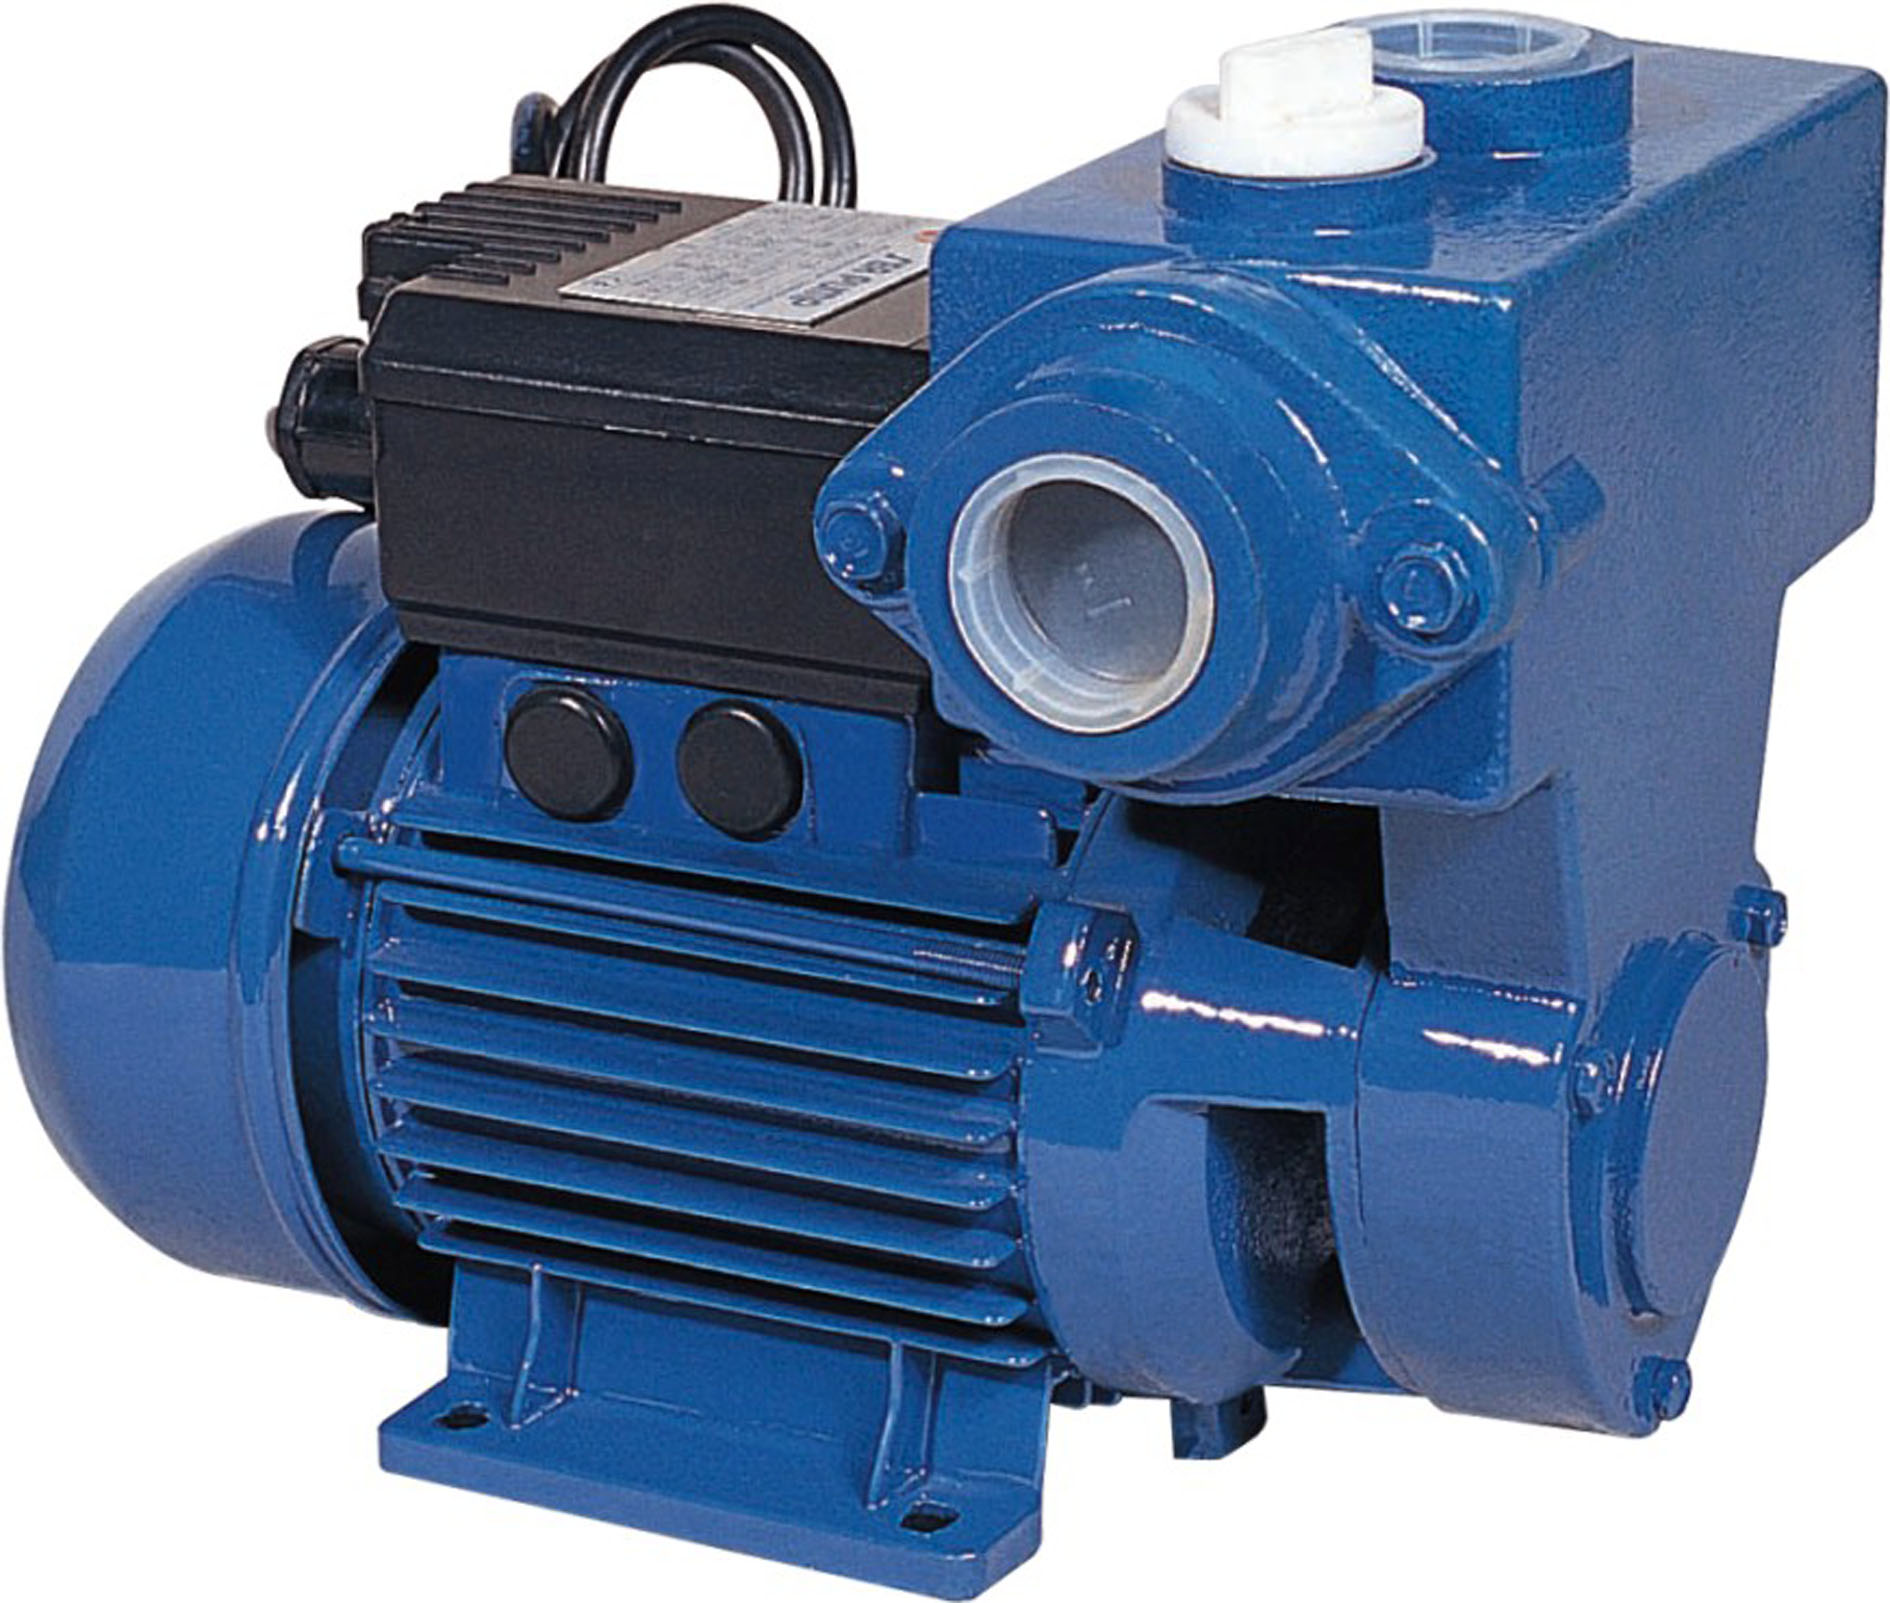 Example of a water pump for a home